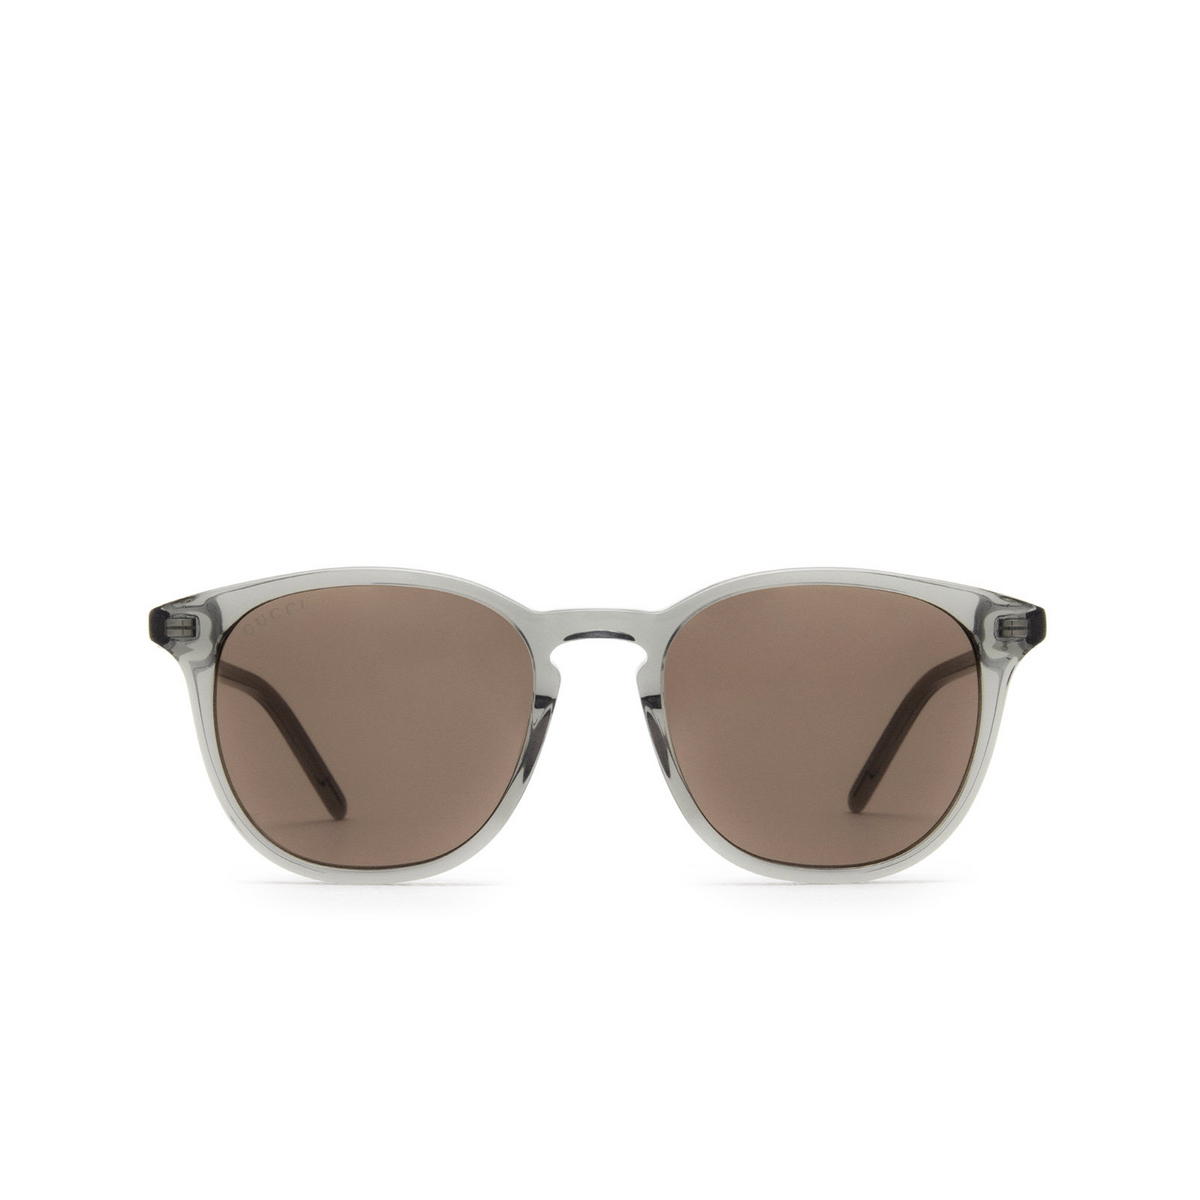 Gucci® Round Sunglasses: GG1157S color Transparent Grey 002 - front view.